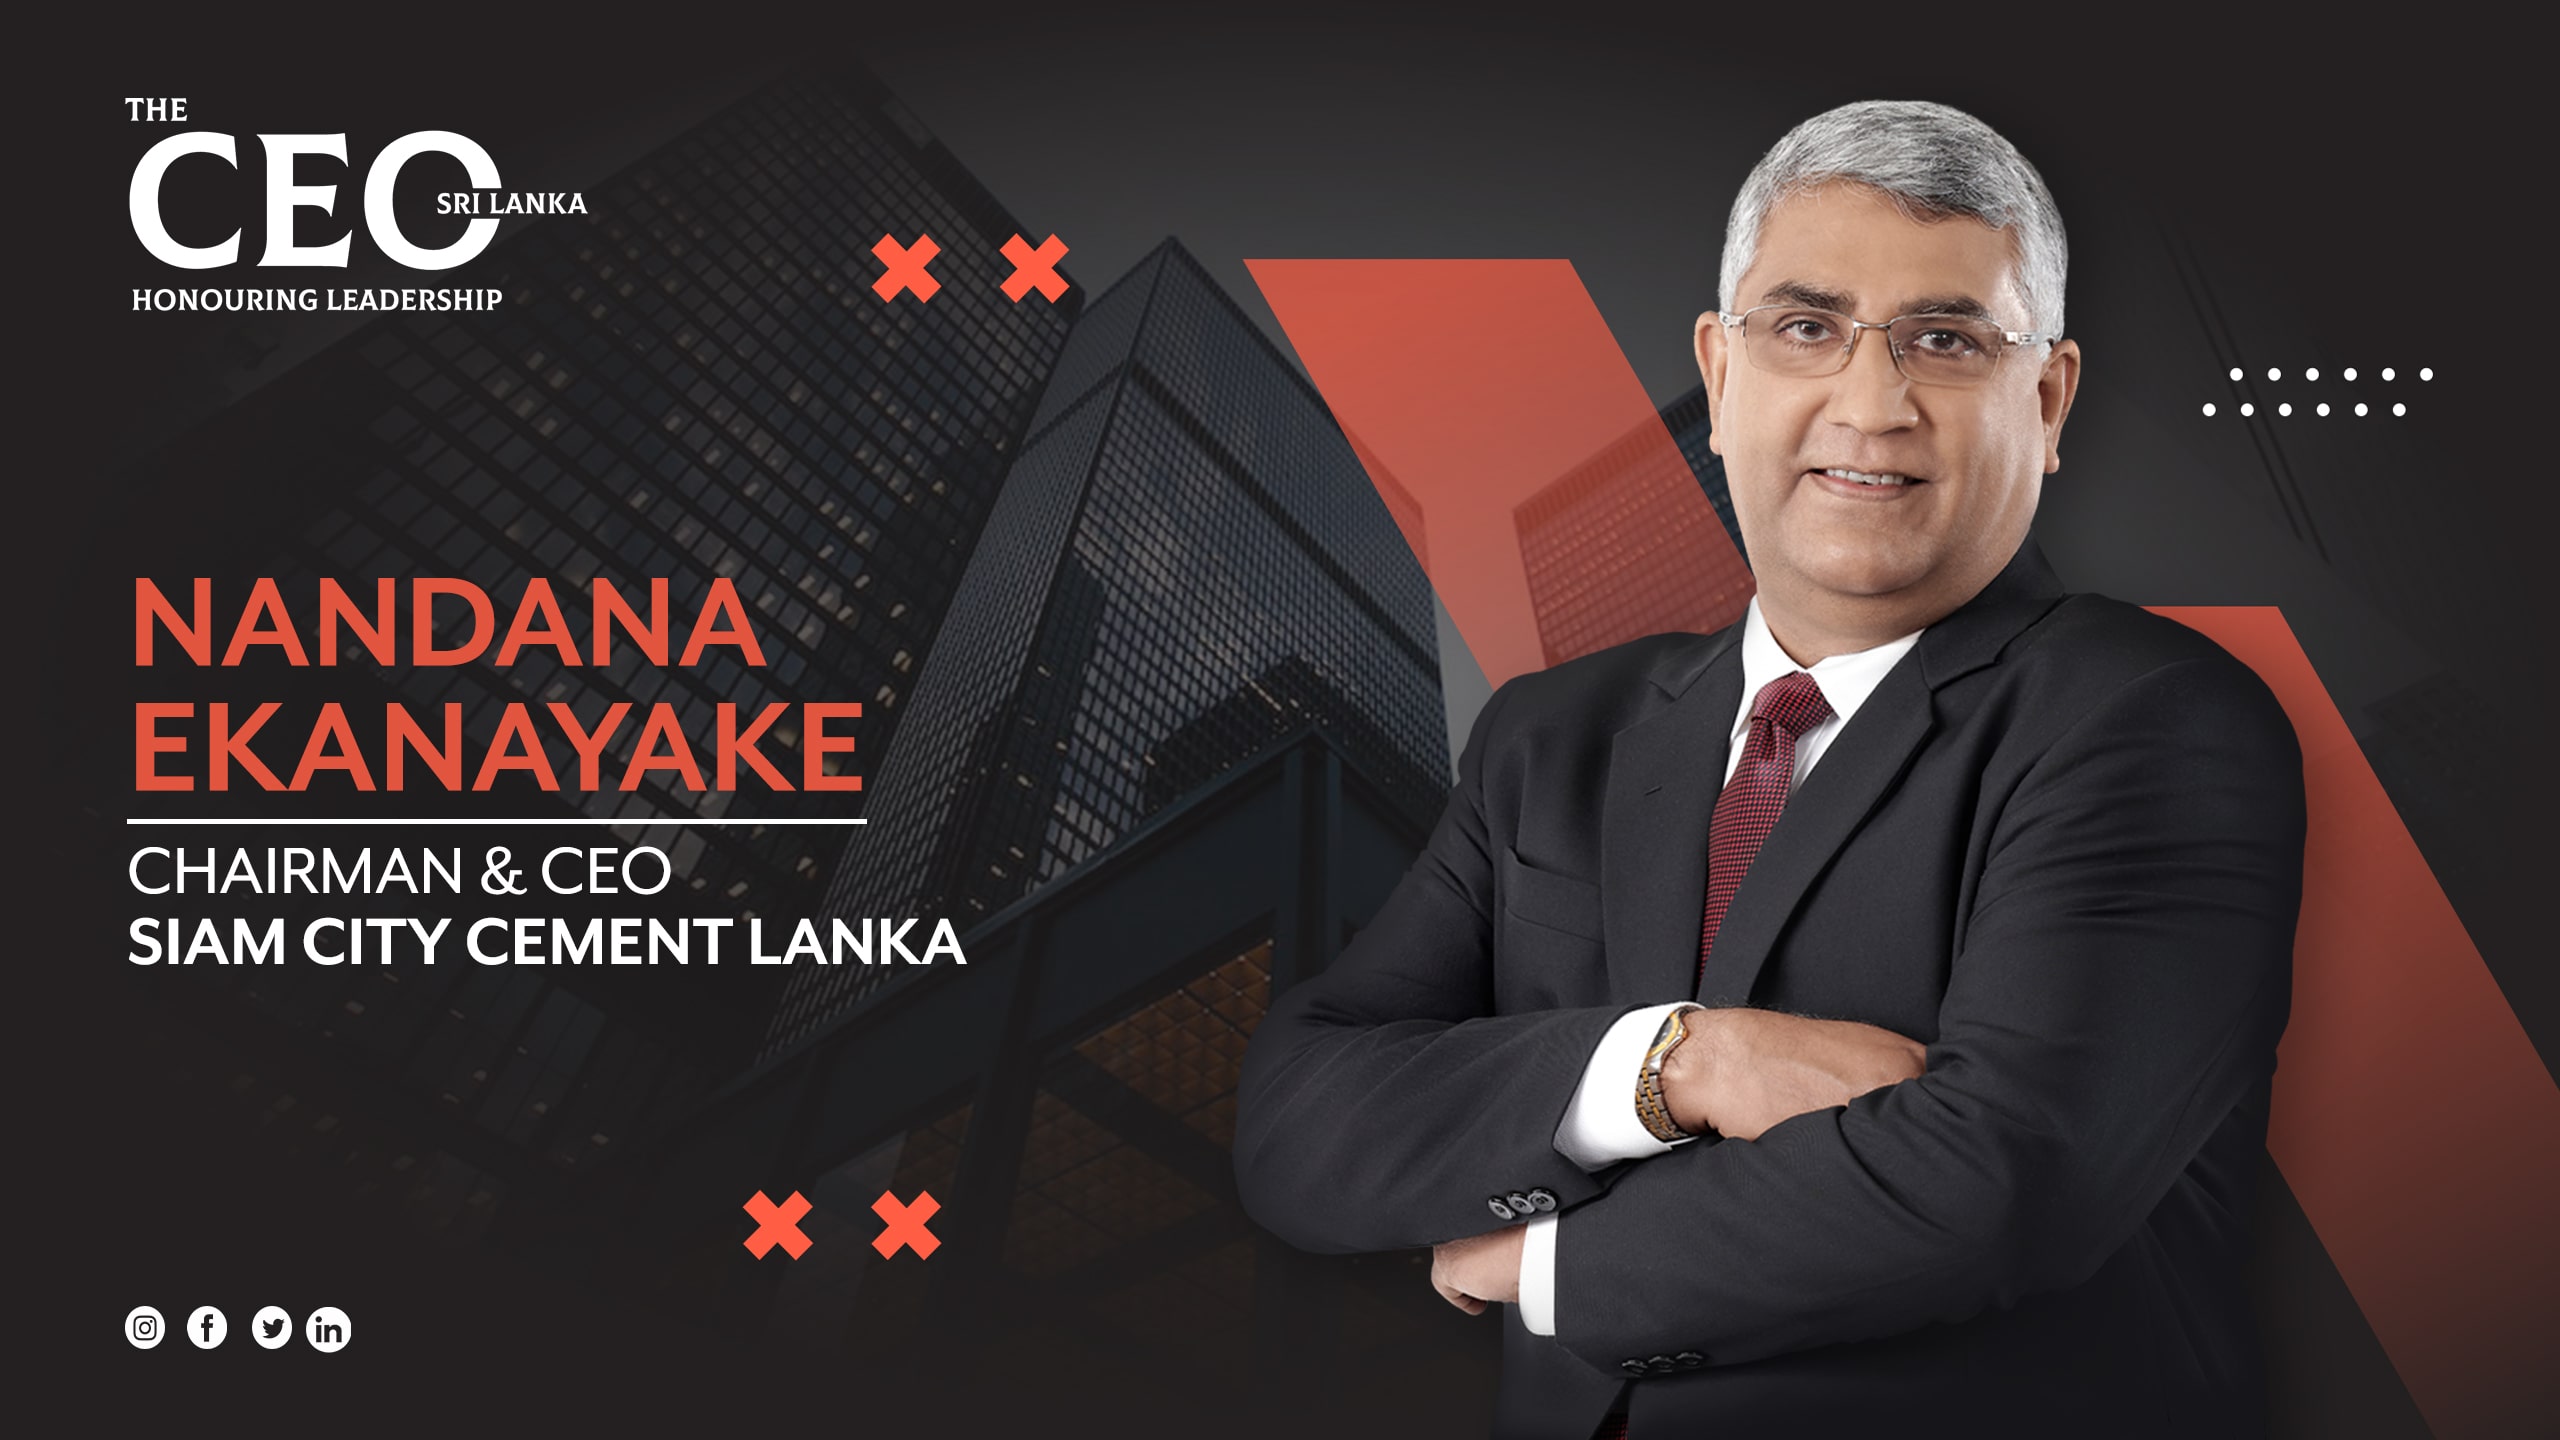 TAKING MOMENTOUS STRIDES UP THE CORPORATE LADDER – THE CHAIRMAN AND CEO OF SIAM CITY CEMENT LANKA, NANDANA EKANAYAKE